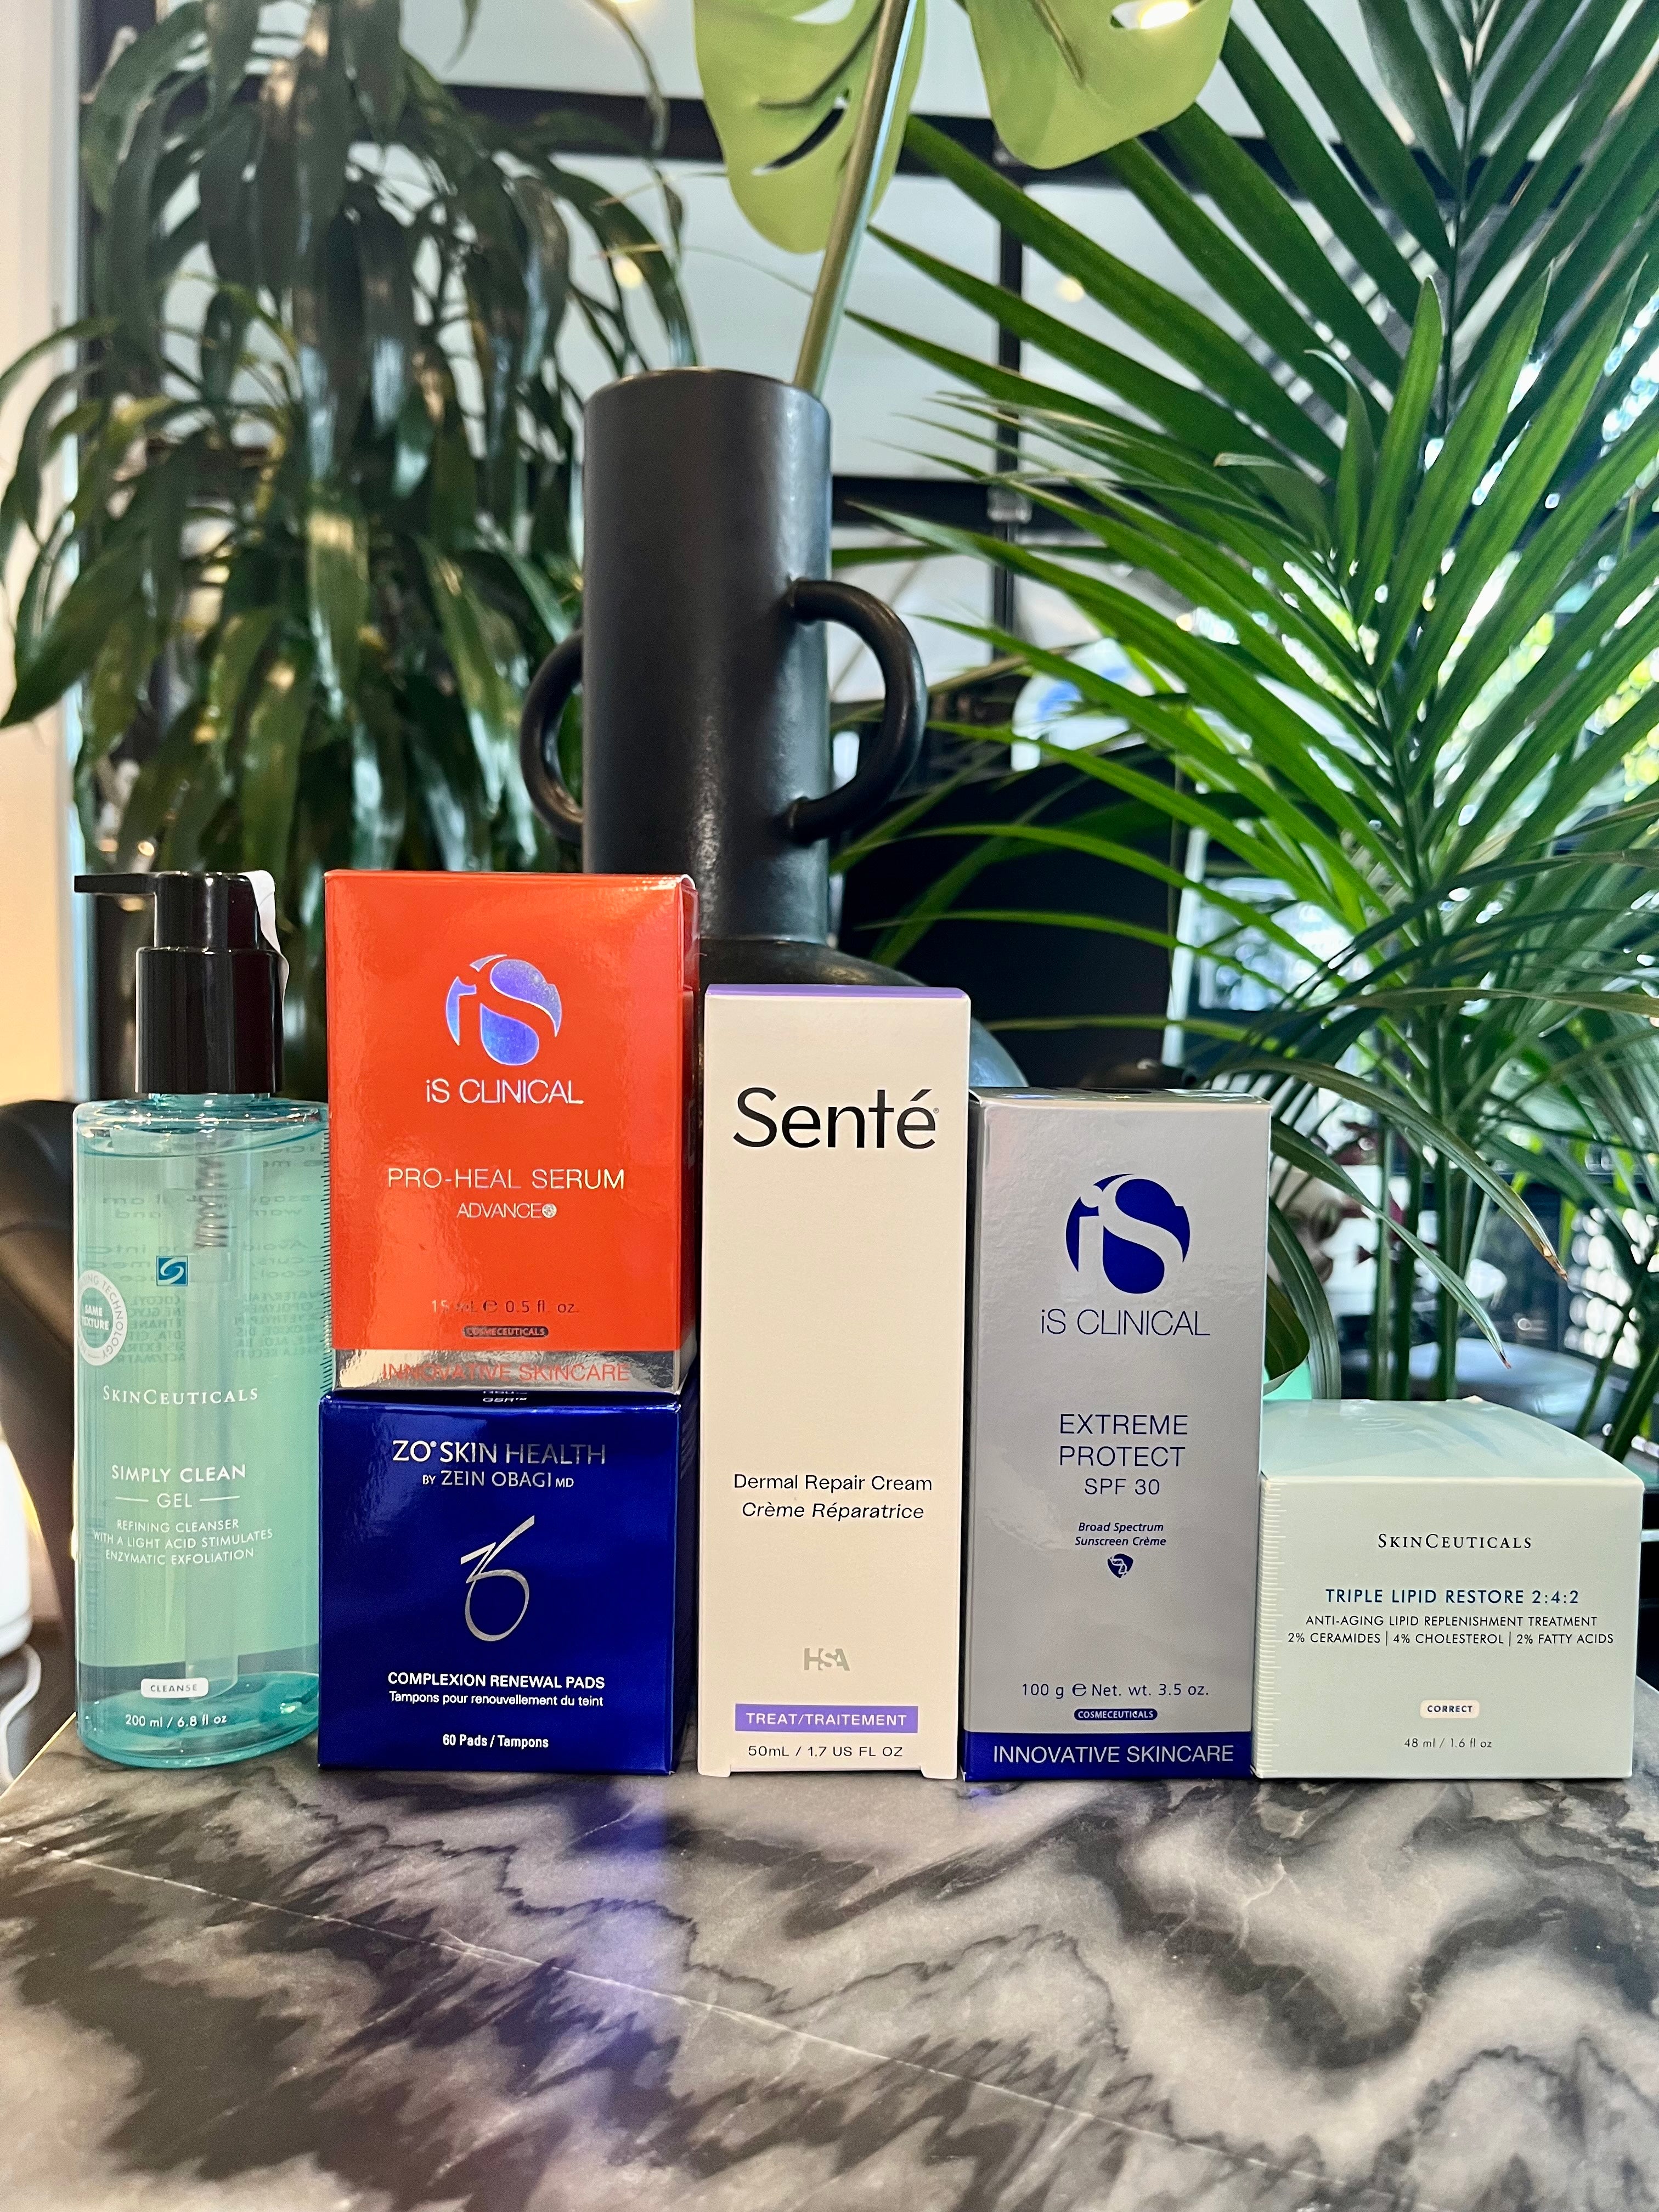 Simply Clean, Skin Ceuticals (AM/PM) Complexion Renewal Pads (PM) Pro-Heal Serum, iS Clinical (AM/PM as tolerated) Dermal Repair Cream, Senté (AM/PM) Extreme Protect, iS Clinical (AM & every 2 hours) Triple Lipid Restore, Skin Ceuticals, (PM)